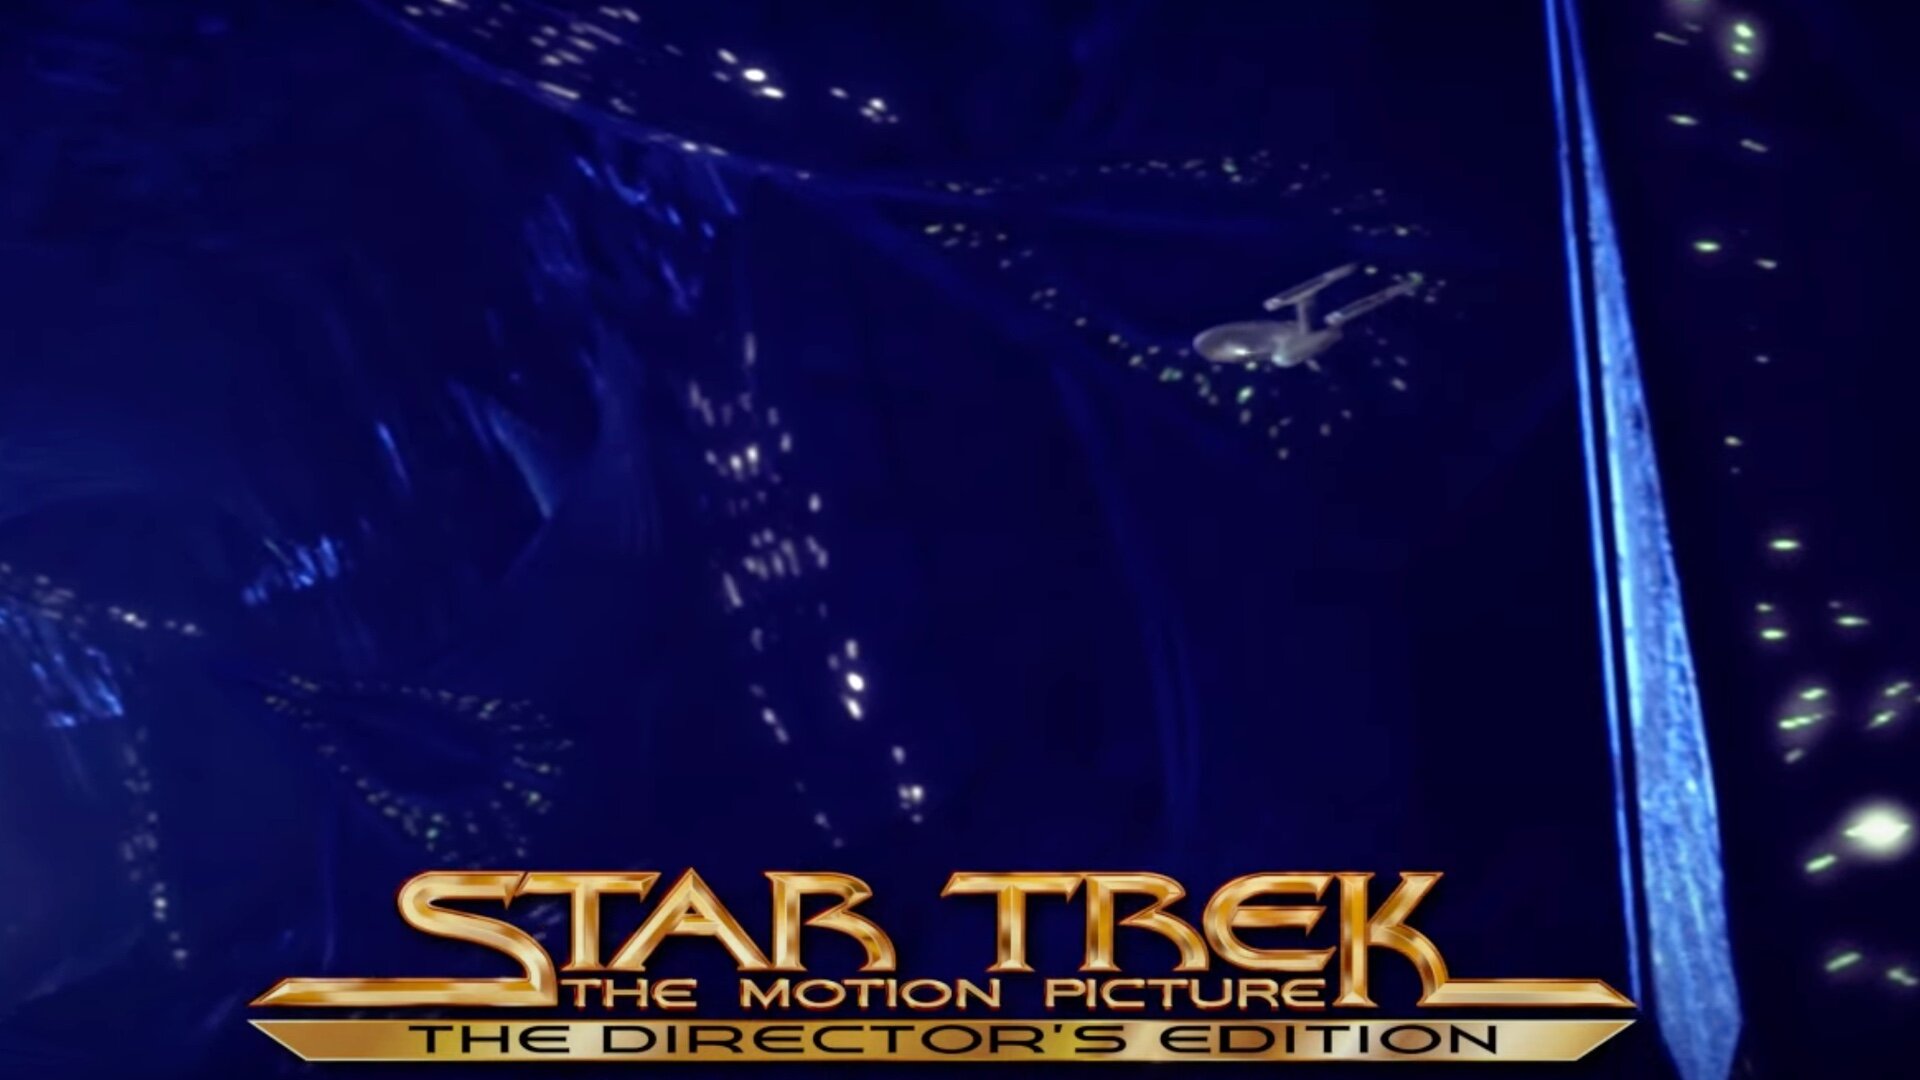 First Look at The 4K Remaster Director's Cut of STAR TREK: THE